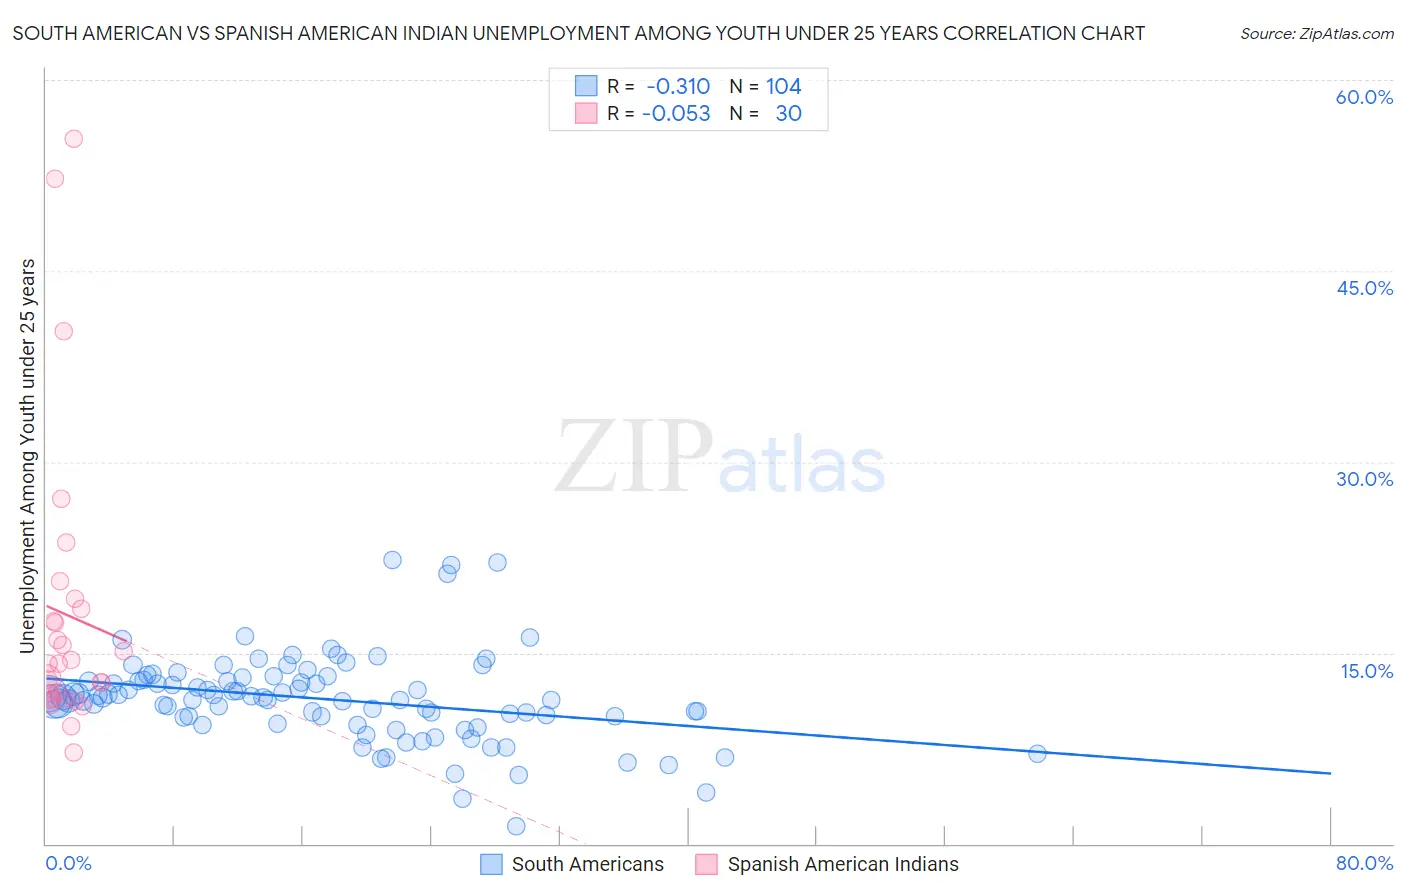 South American vs Spanish American Indian Unemployment Among Youth under 25 years